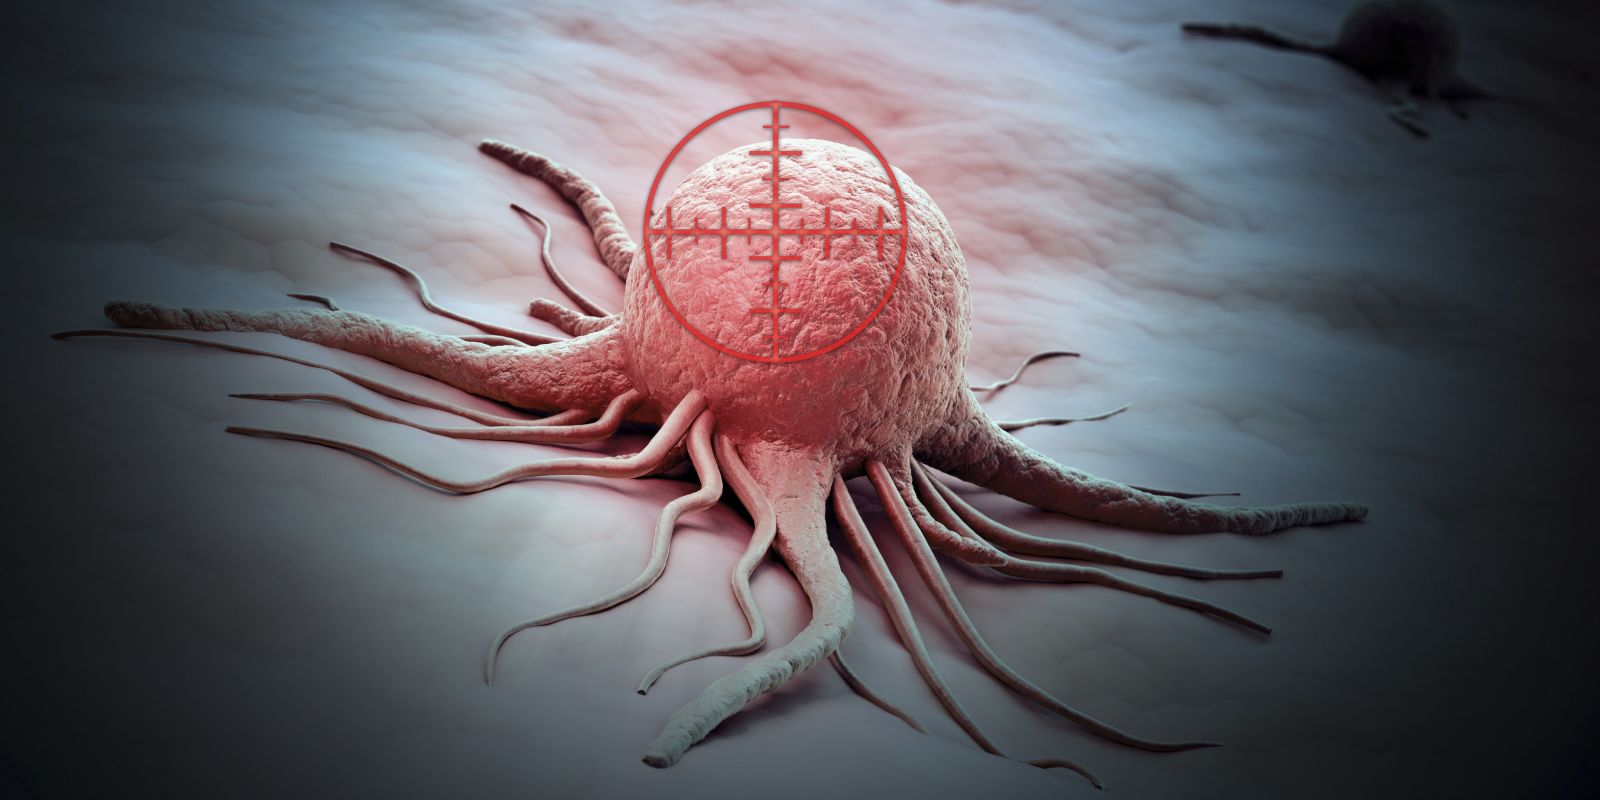 Found a way to destroy cancer cells, leaving healthy survivors